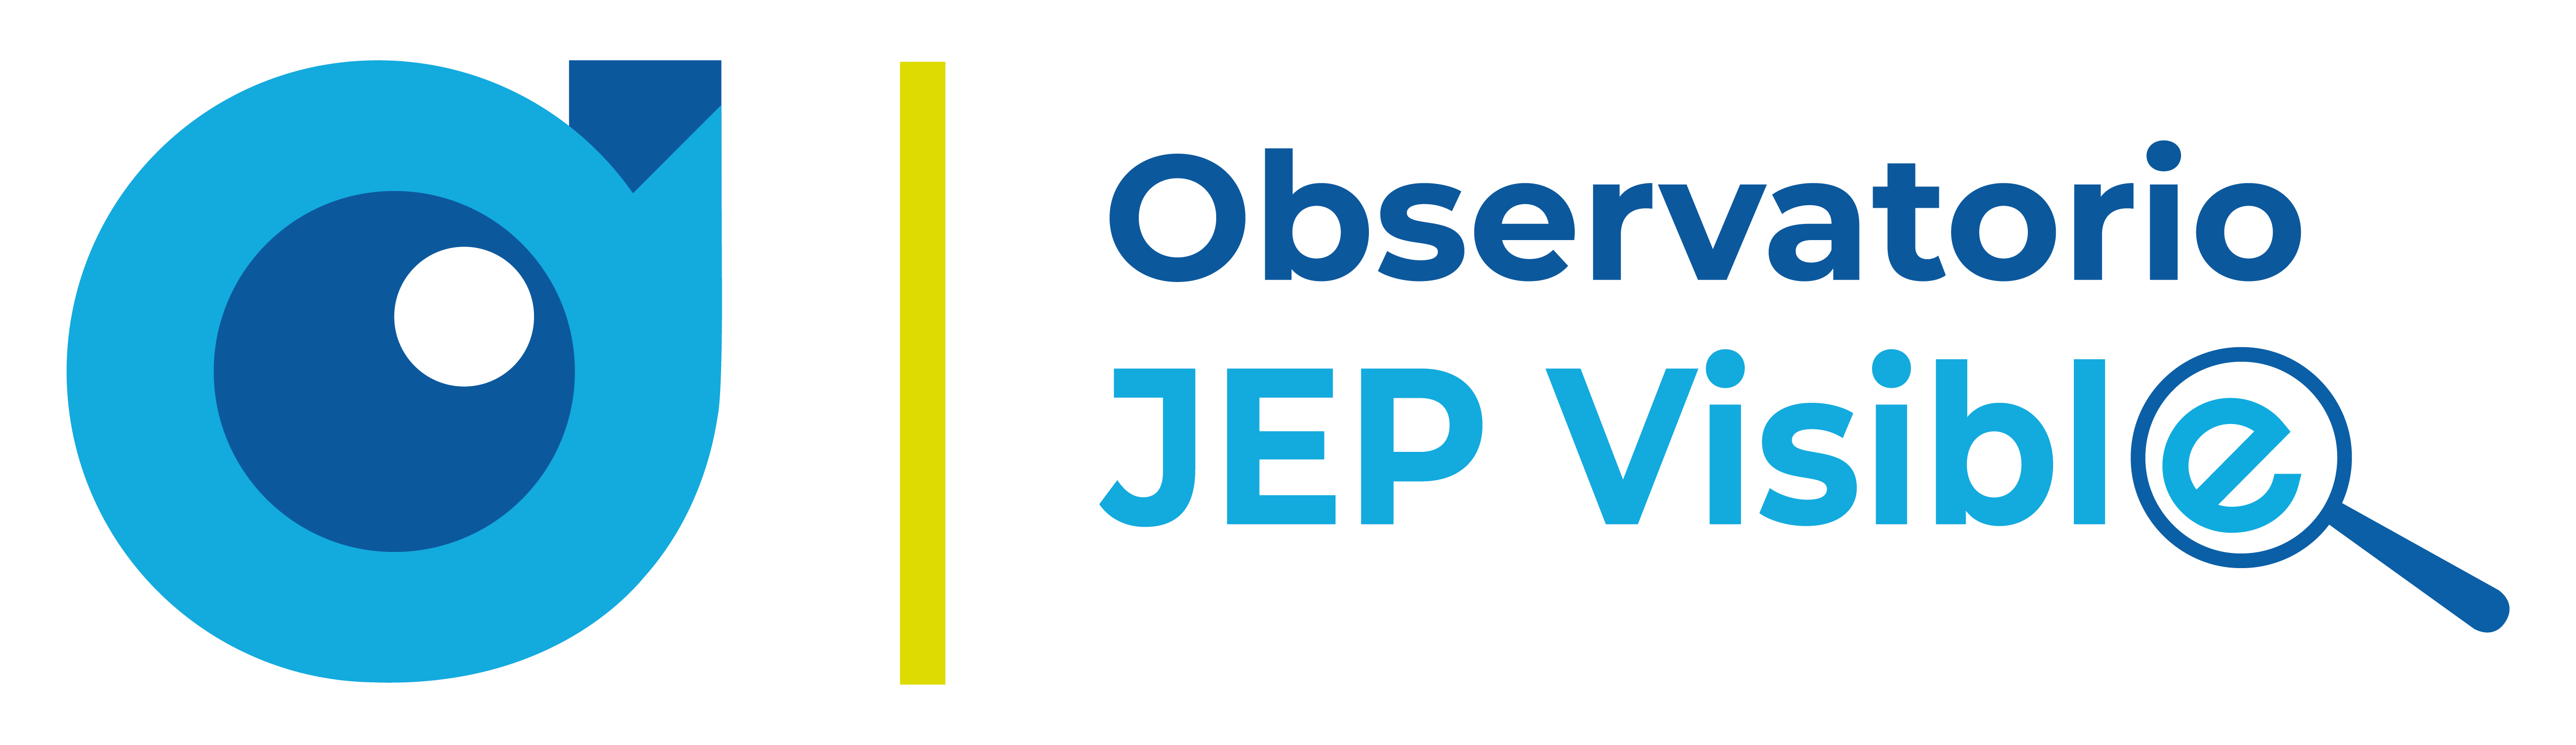 Jep Visible Observatorio